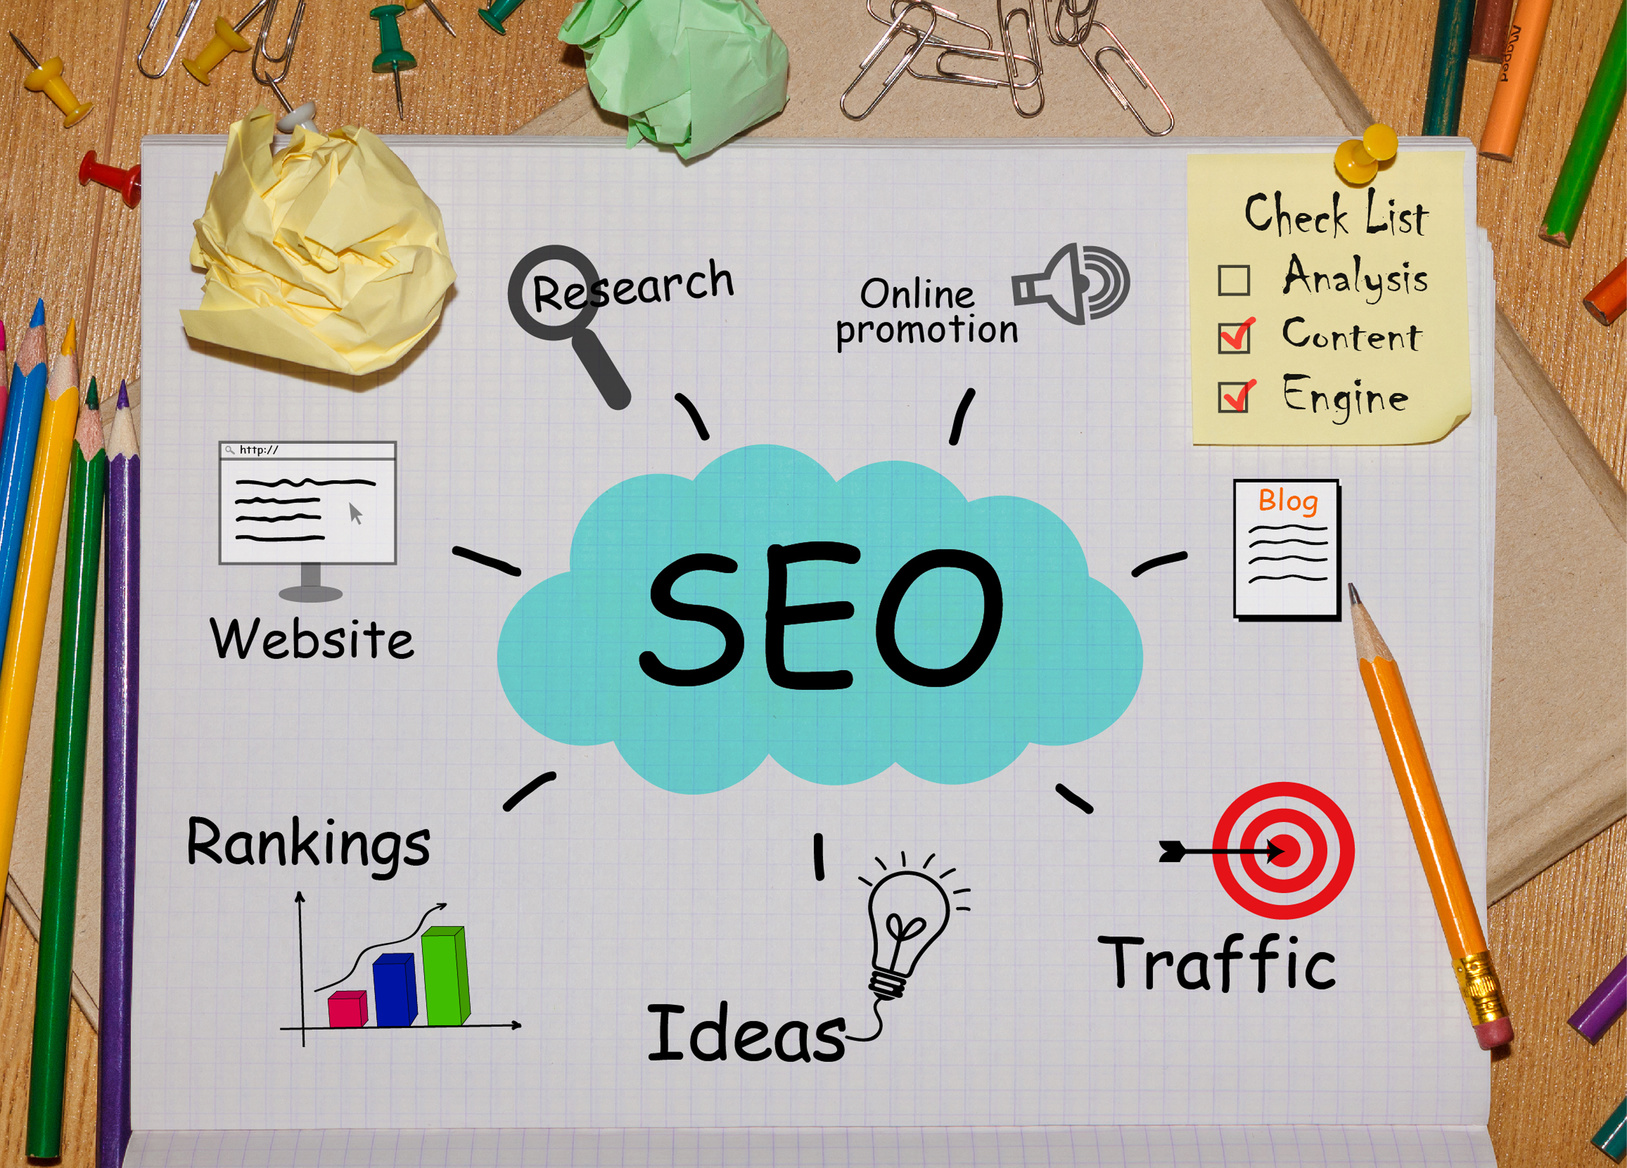 What Should You Know Before You Hire an SEO Company?